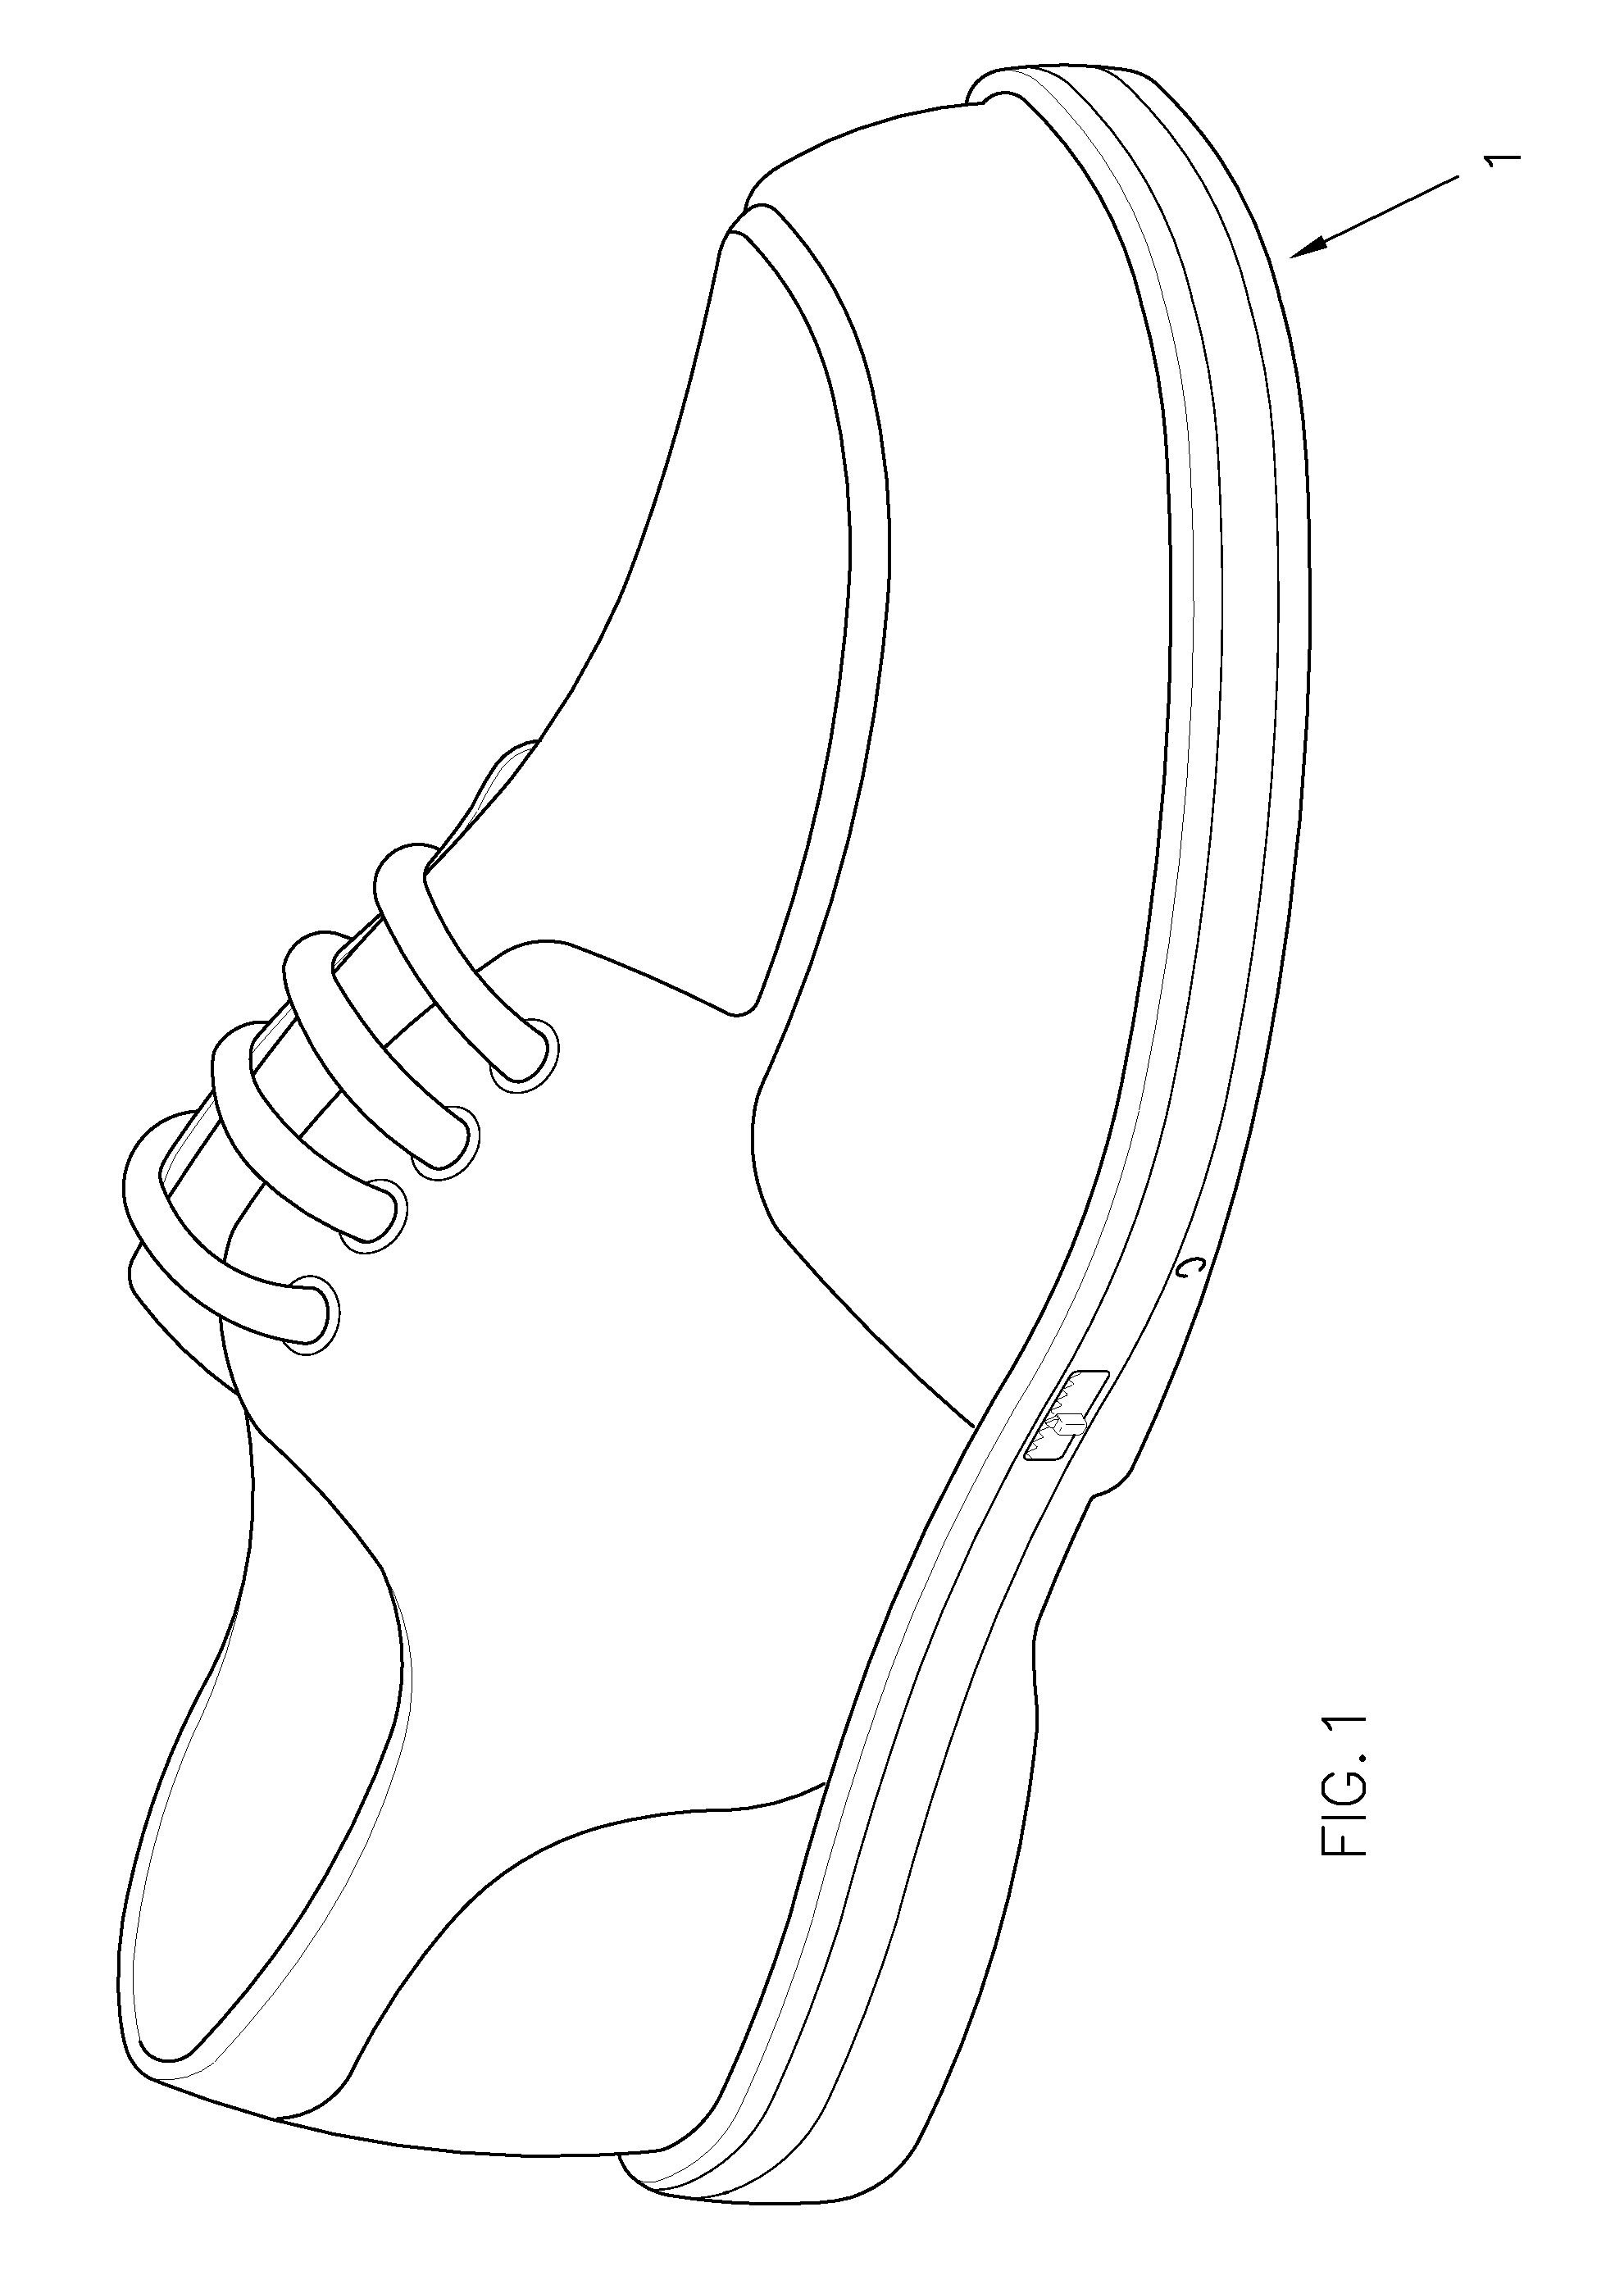 Aerated shoe having cushioning effect, with air flow regulator